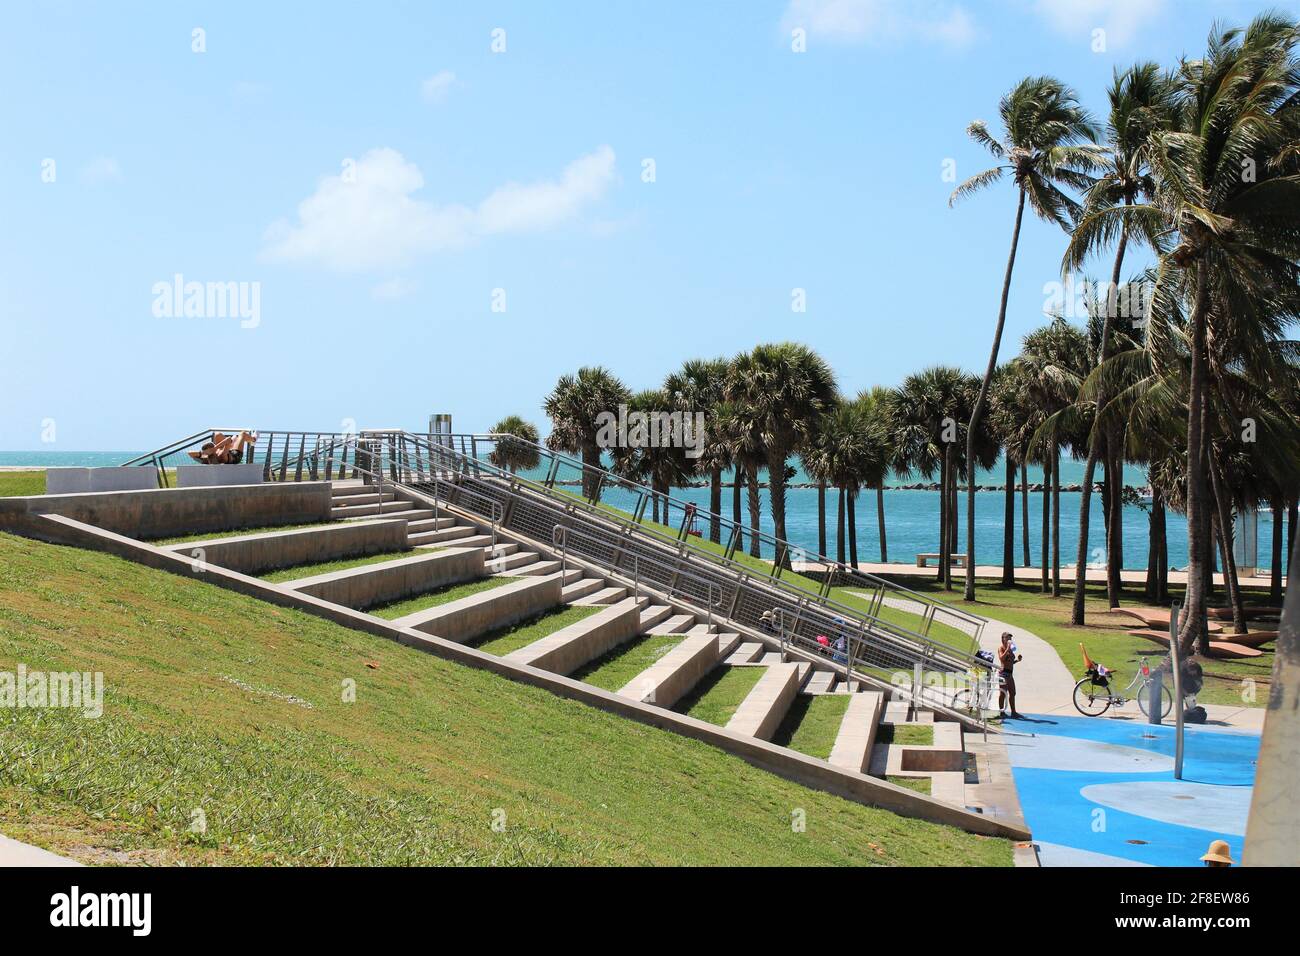 Outdoor workout and water park with running and exercise steps for people who want to workout outdoors in South Pointe Park Miami Beach, Florida. Stock Photo